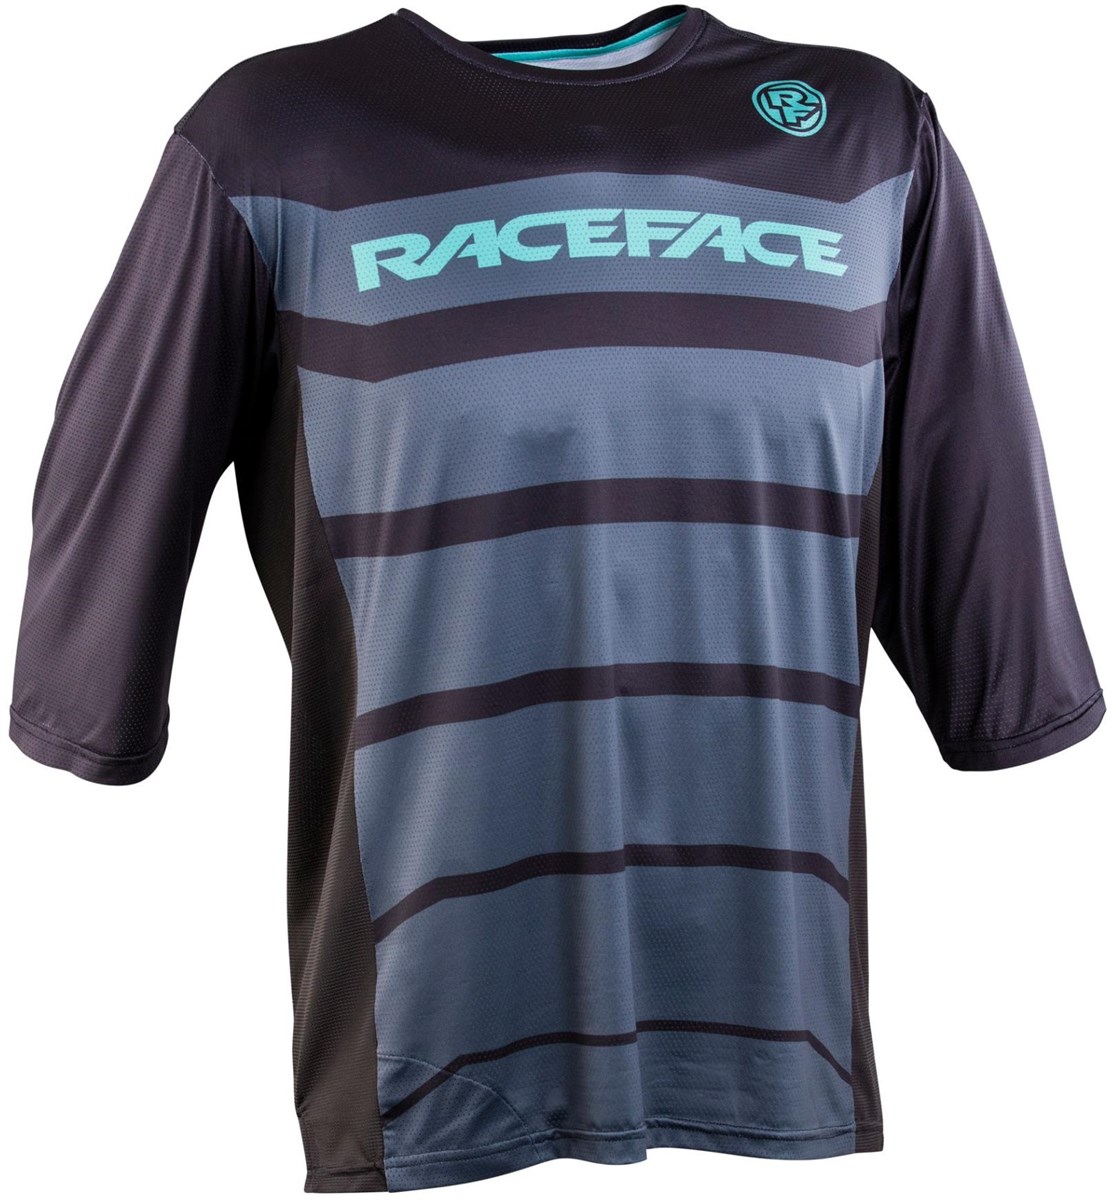 Race Face Indy 3/4 Sleeve Jersey product image